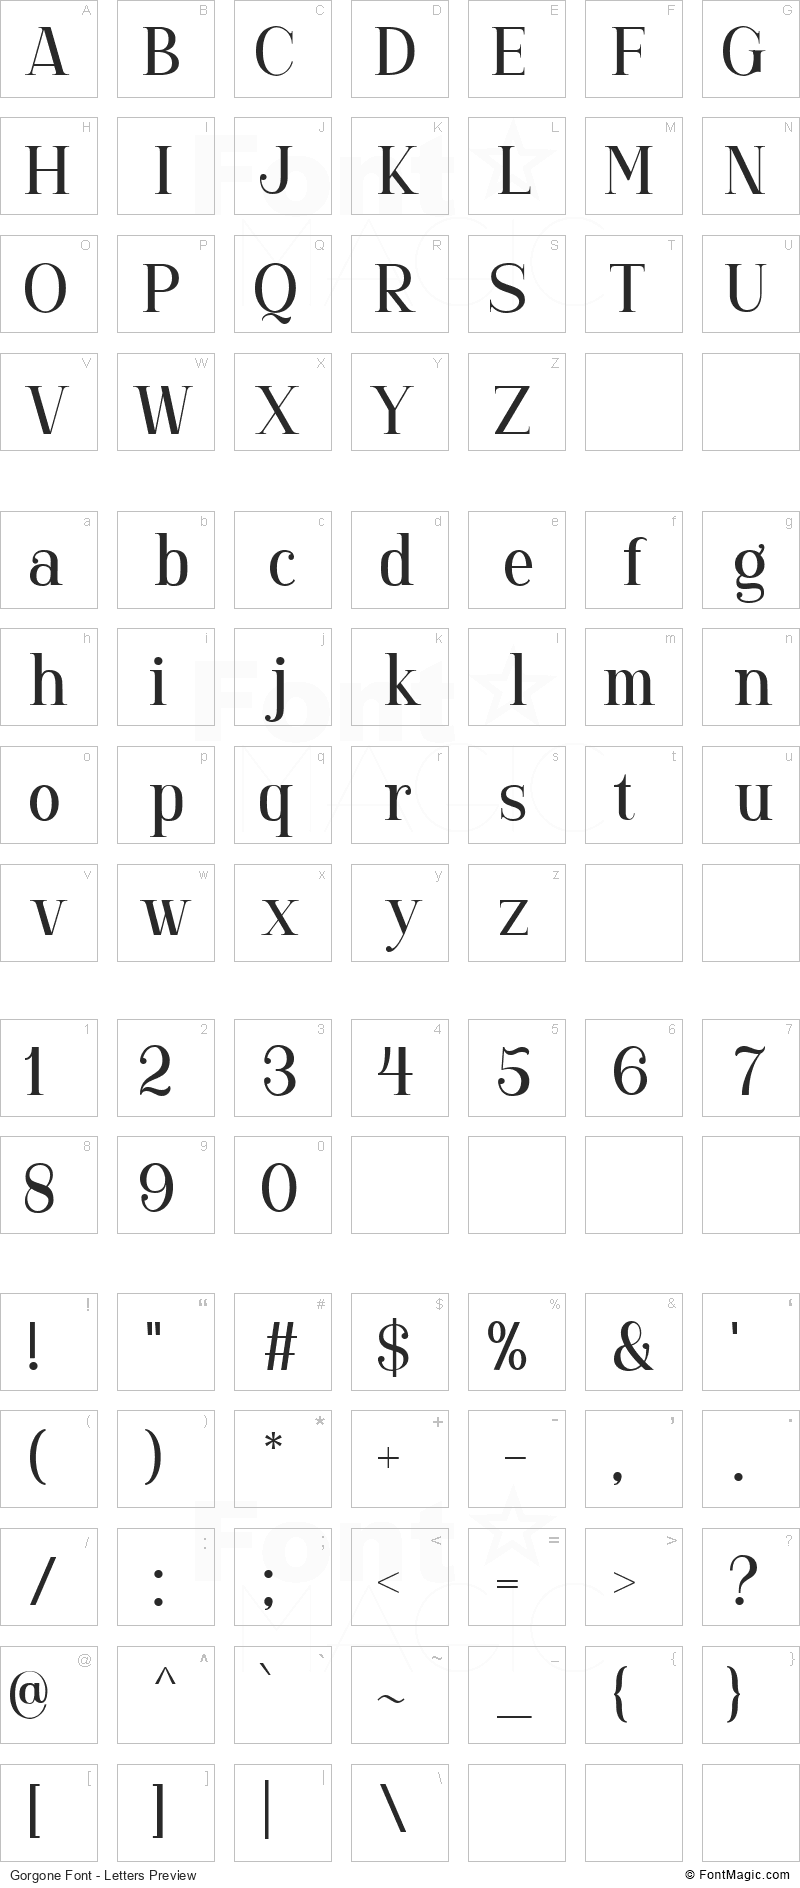 Gorgone Font - All Latters Preview Chart